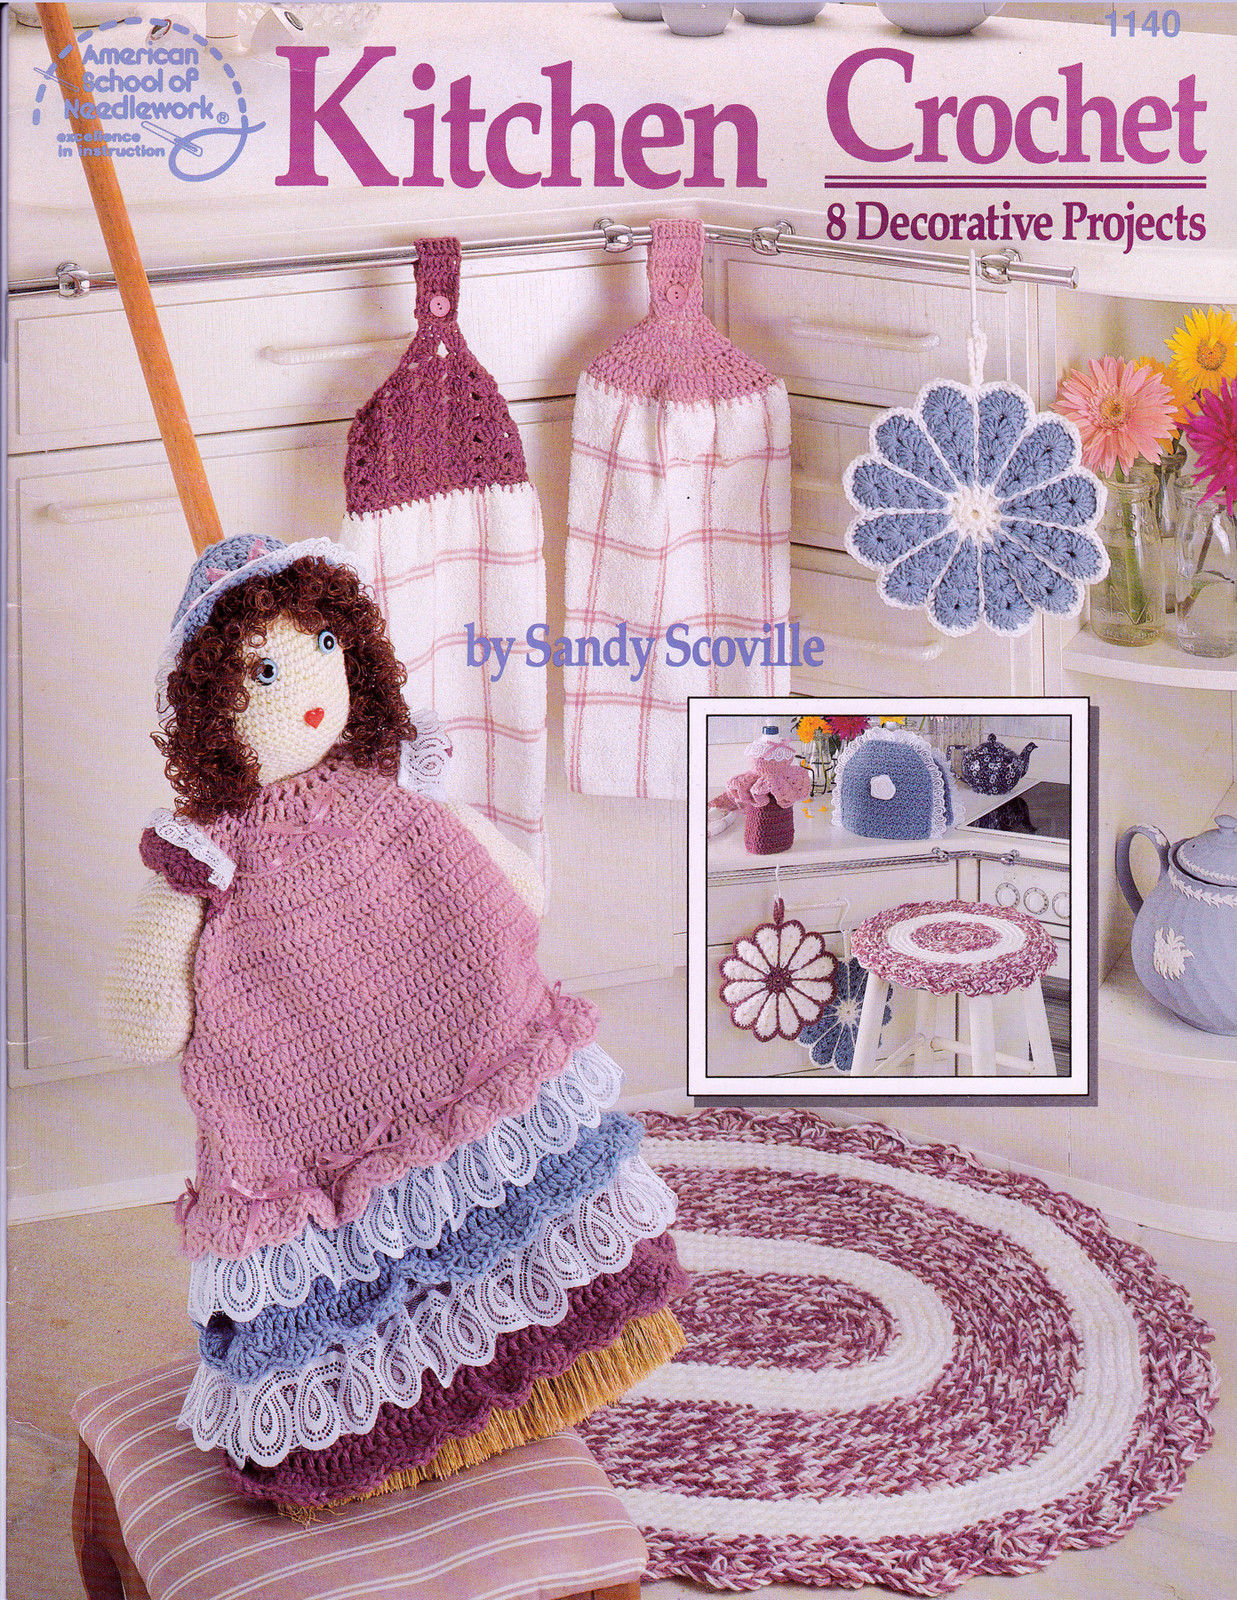 CROCHET KITCHEN 8 DECOR PROJECTS TEA COZY POTHOLDER BROOM COVER DOLL TOPPERS NEW - $7.99